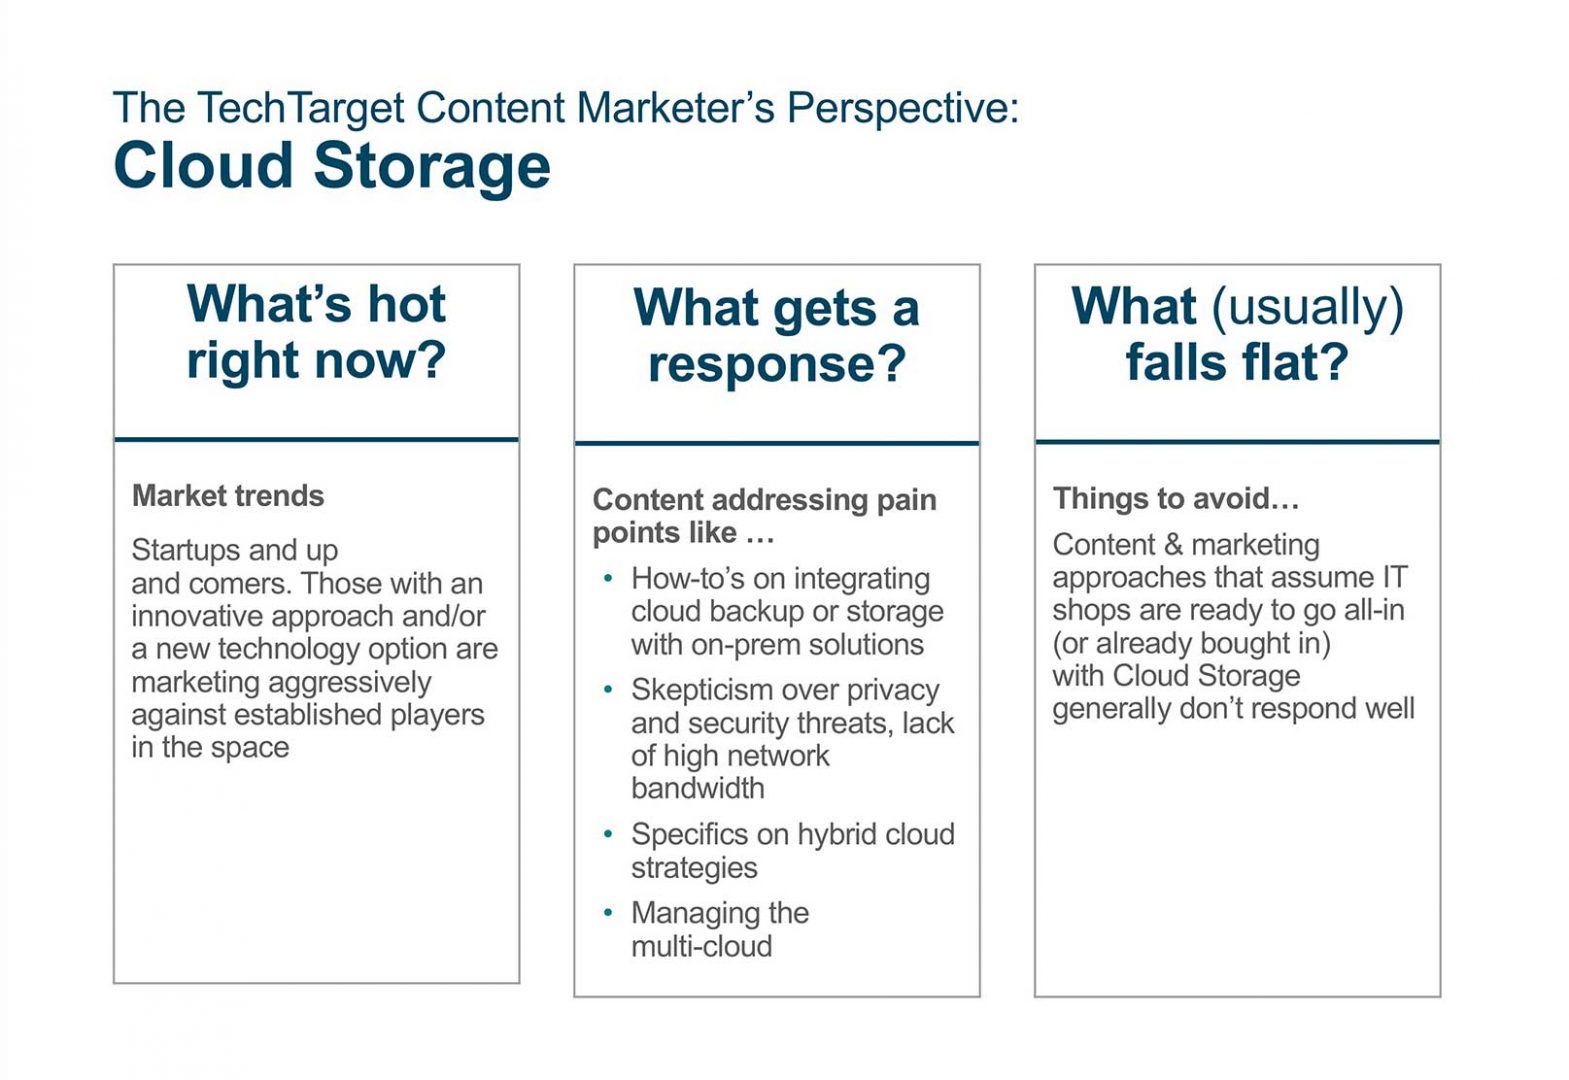 TechTarget Content Marketer's Perspective on Cloud Storage